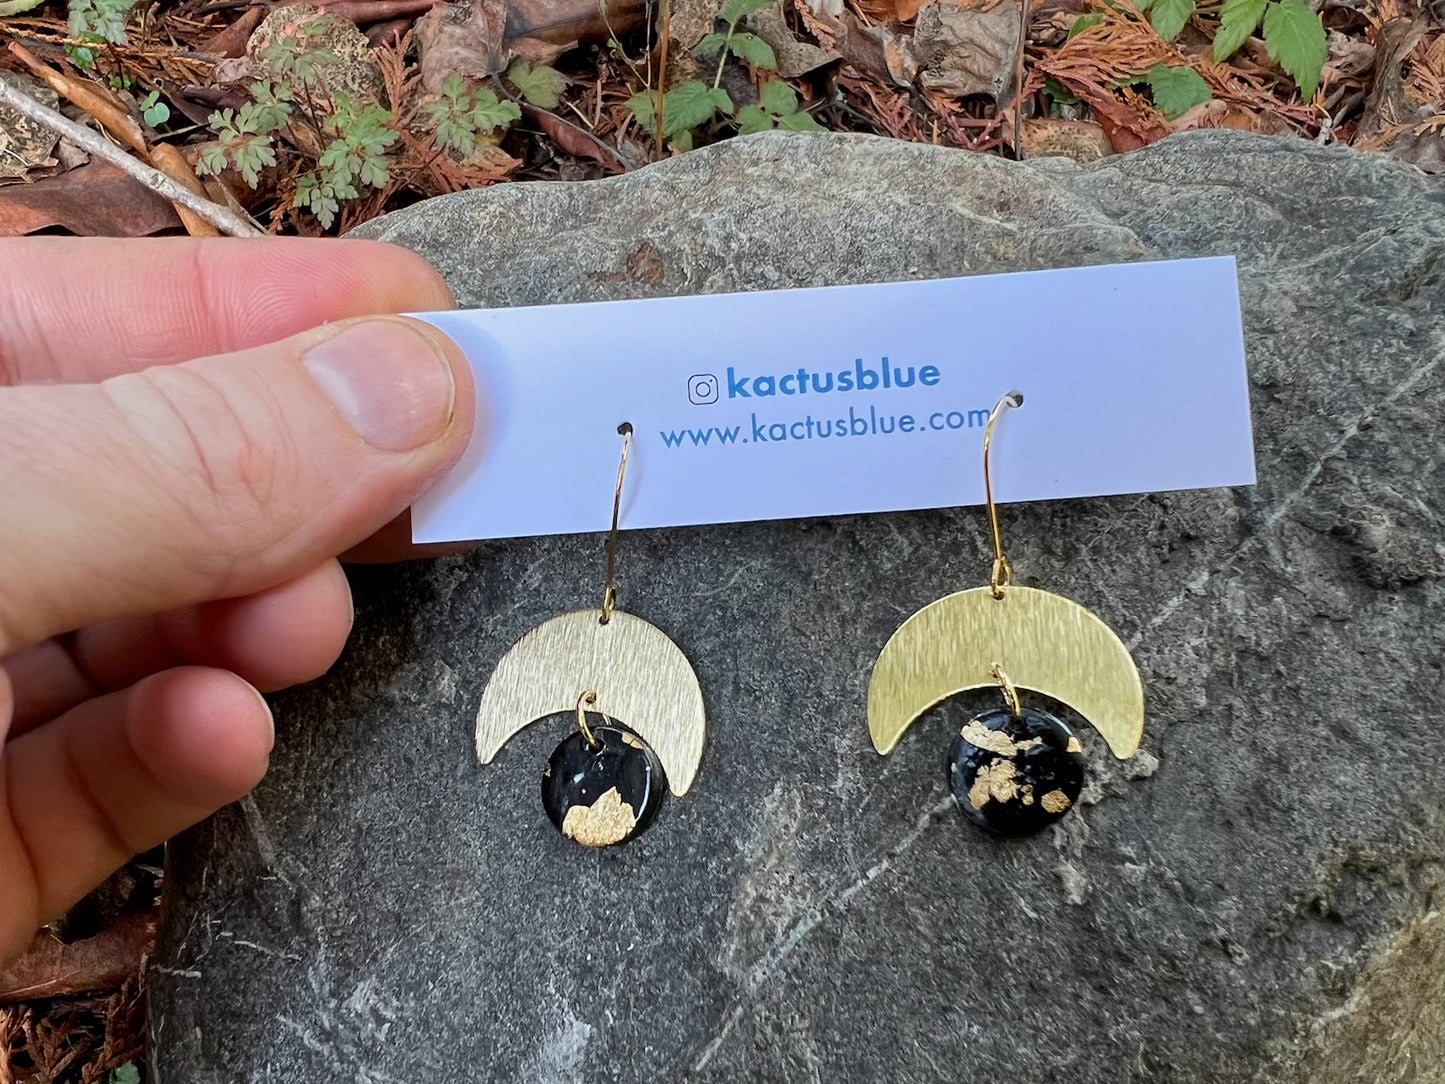 Goddess half moon earrings made with gold plated stainless steel.